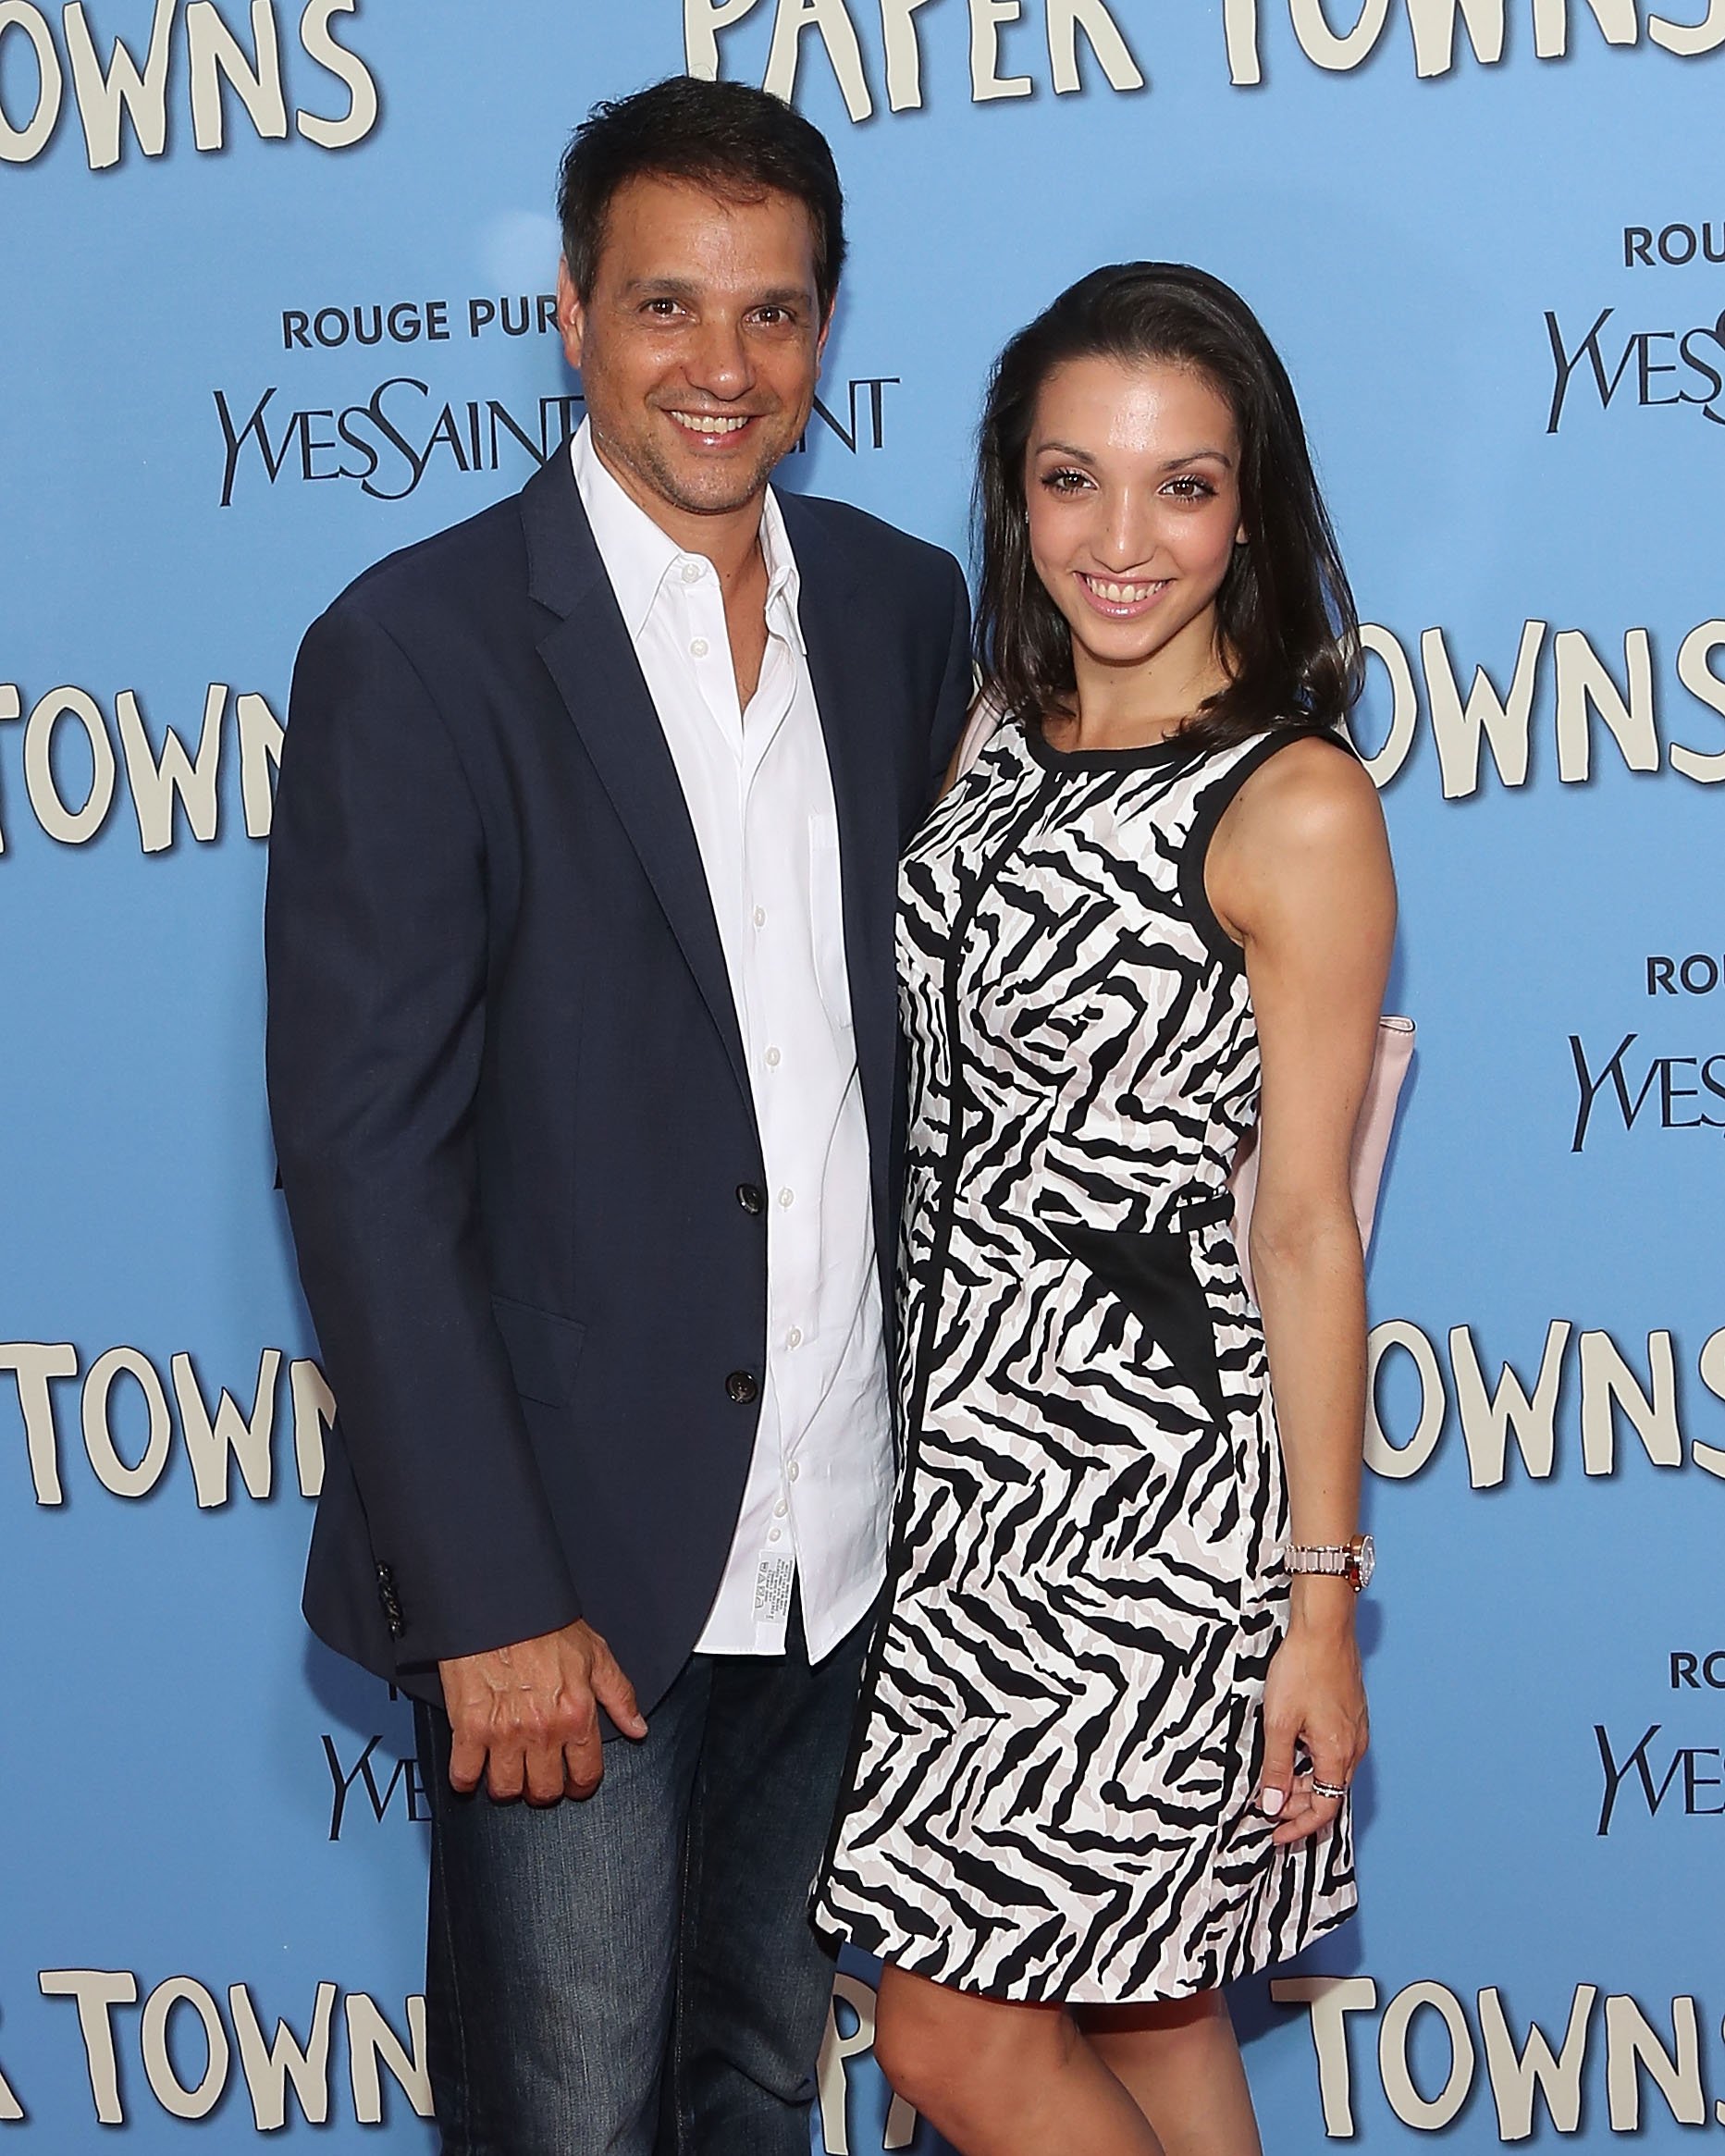 Ralph Macchio and Julia Macchio at the New York premiere of "Paper cities" on July 21, 2015 |  Source: Getty Images